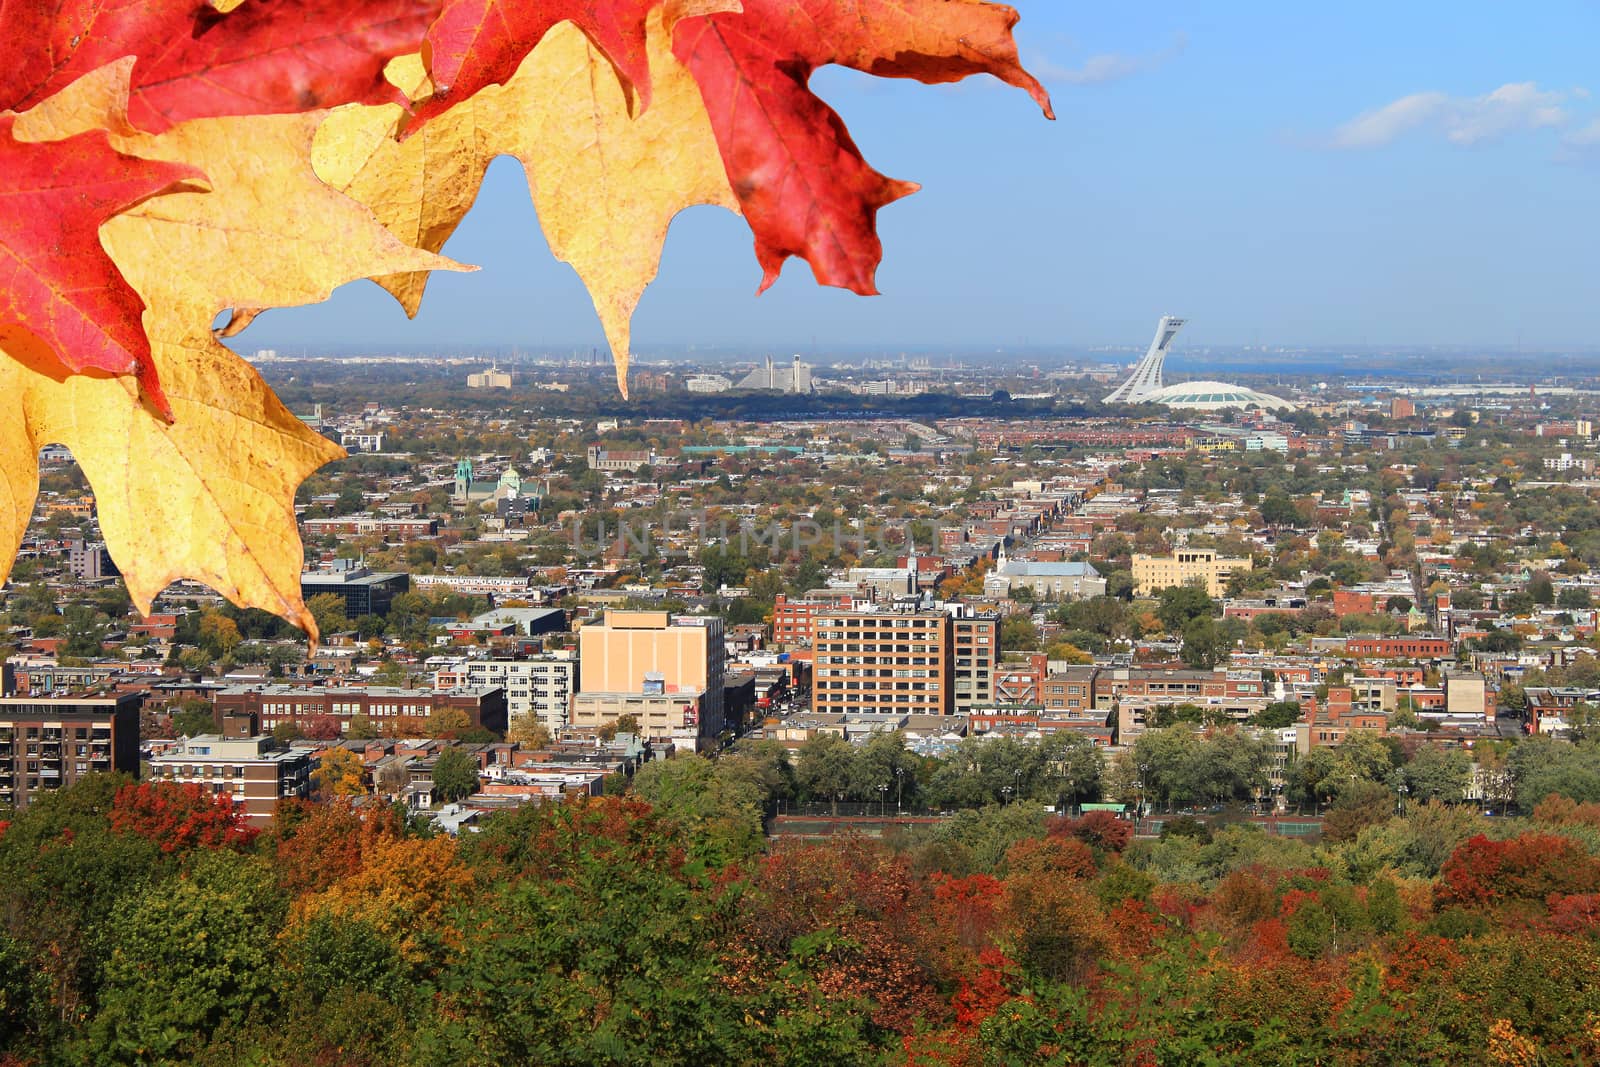 Panoramic view of North Montreal, Quebec, Canada during Autumn or Fall season  with colorful leaves and Olympic Stadium in the background 